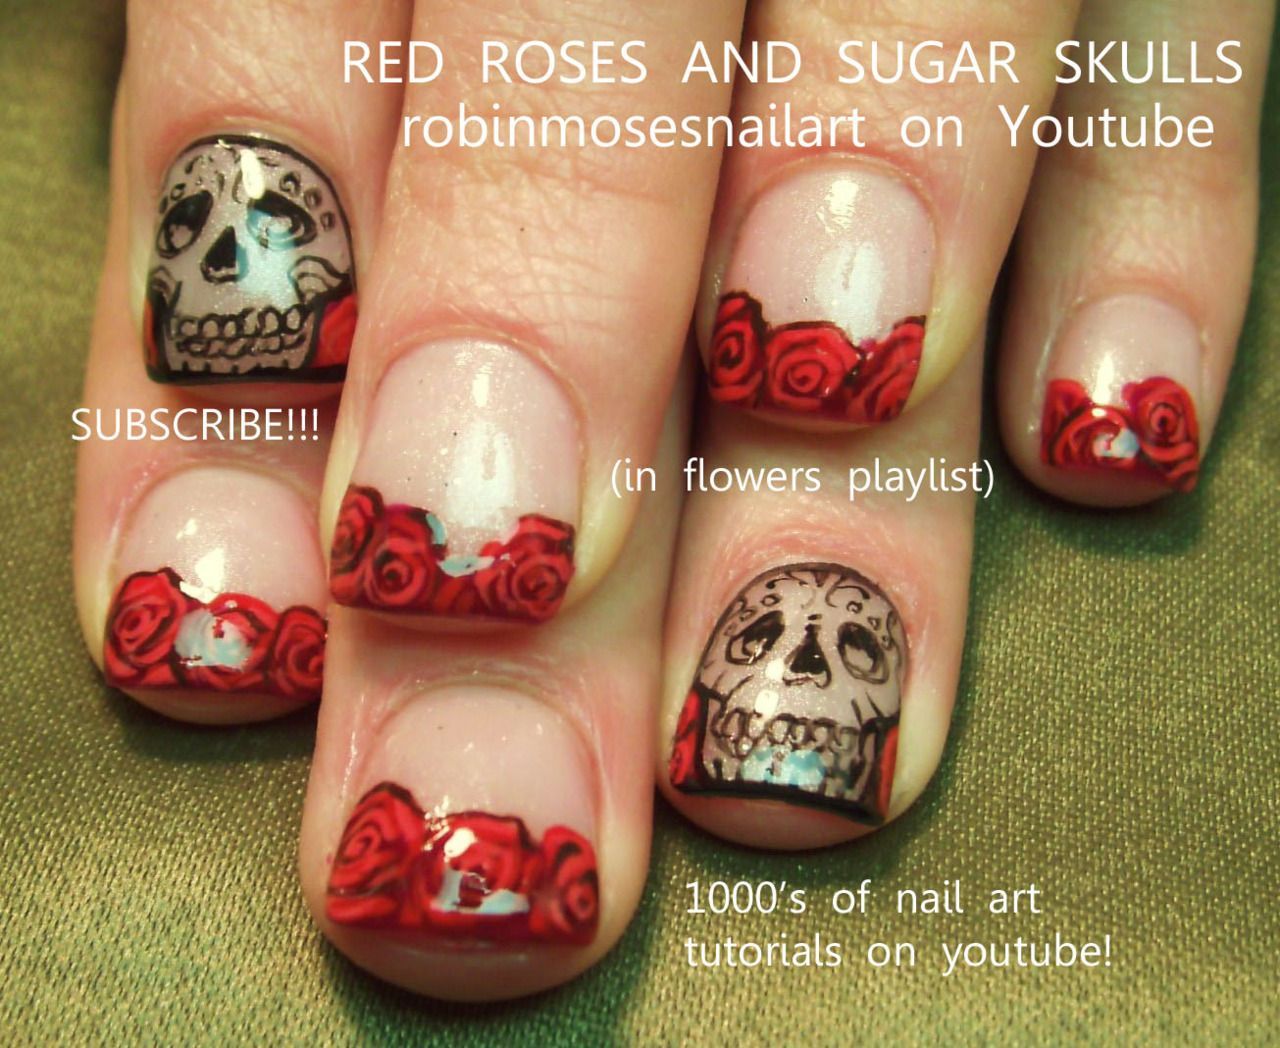 sugar skull nails. Tried this for Dia de los muertos, with a black nail pen and it was great.